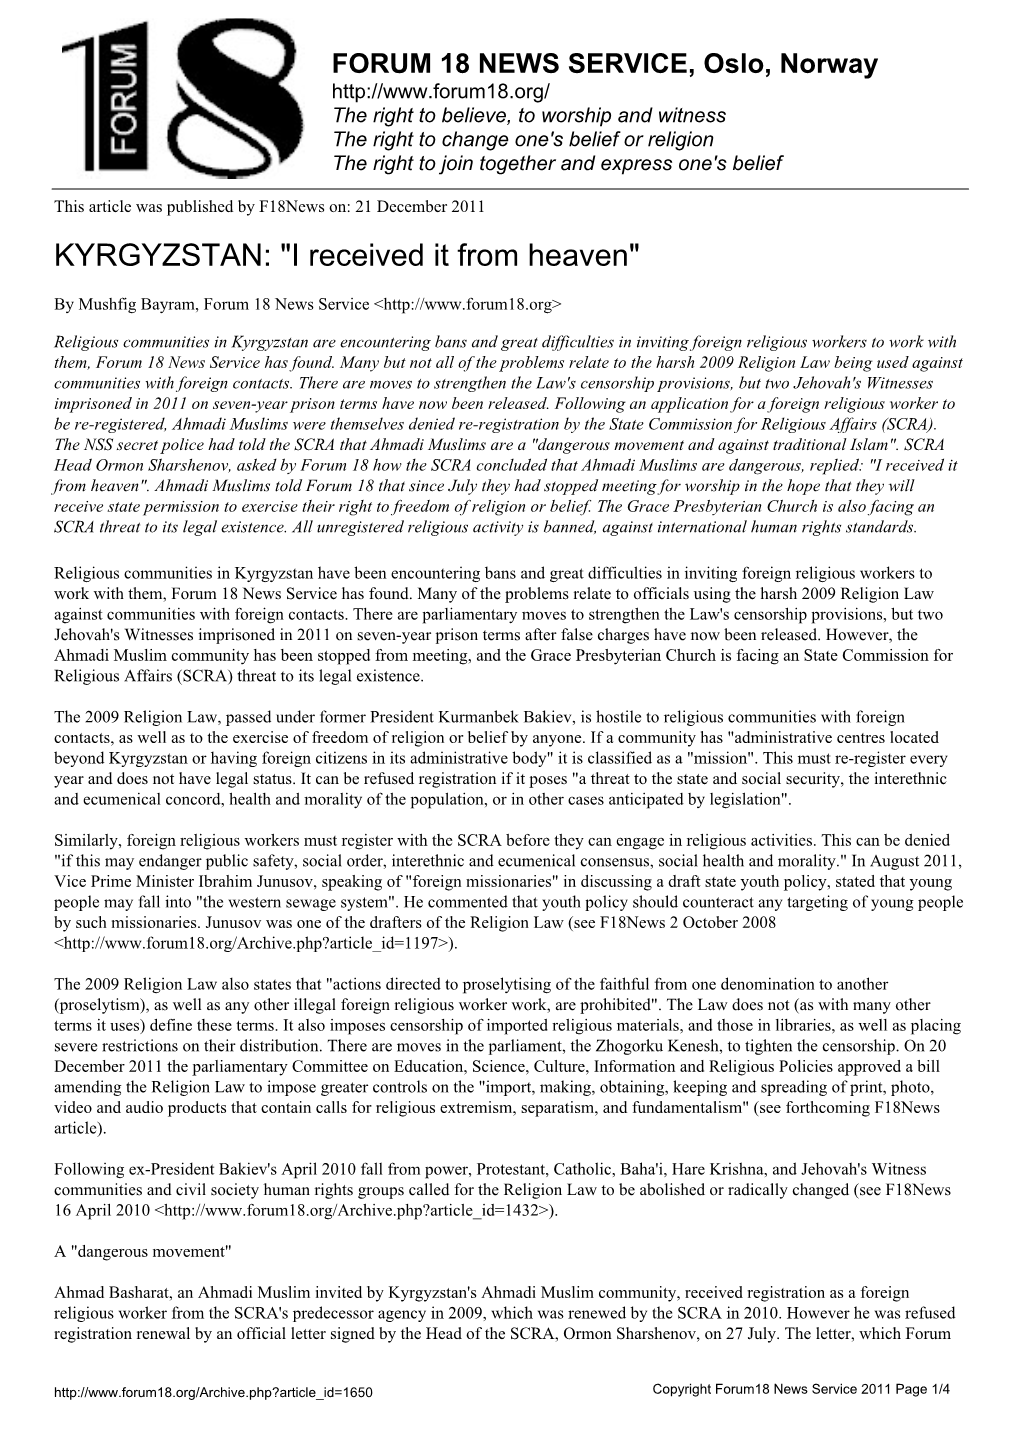 KYRGYZSTAN: "I Received It from Heaven"